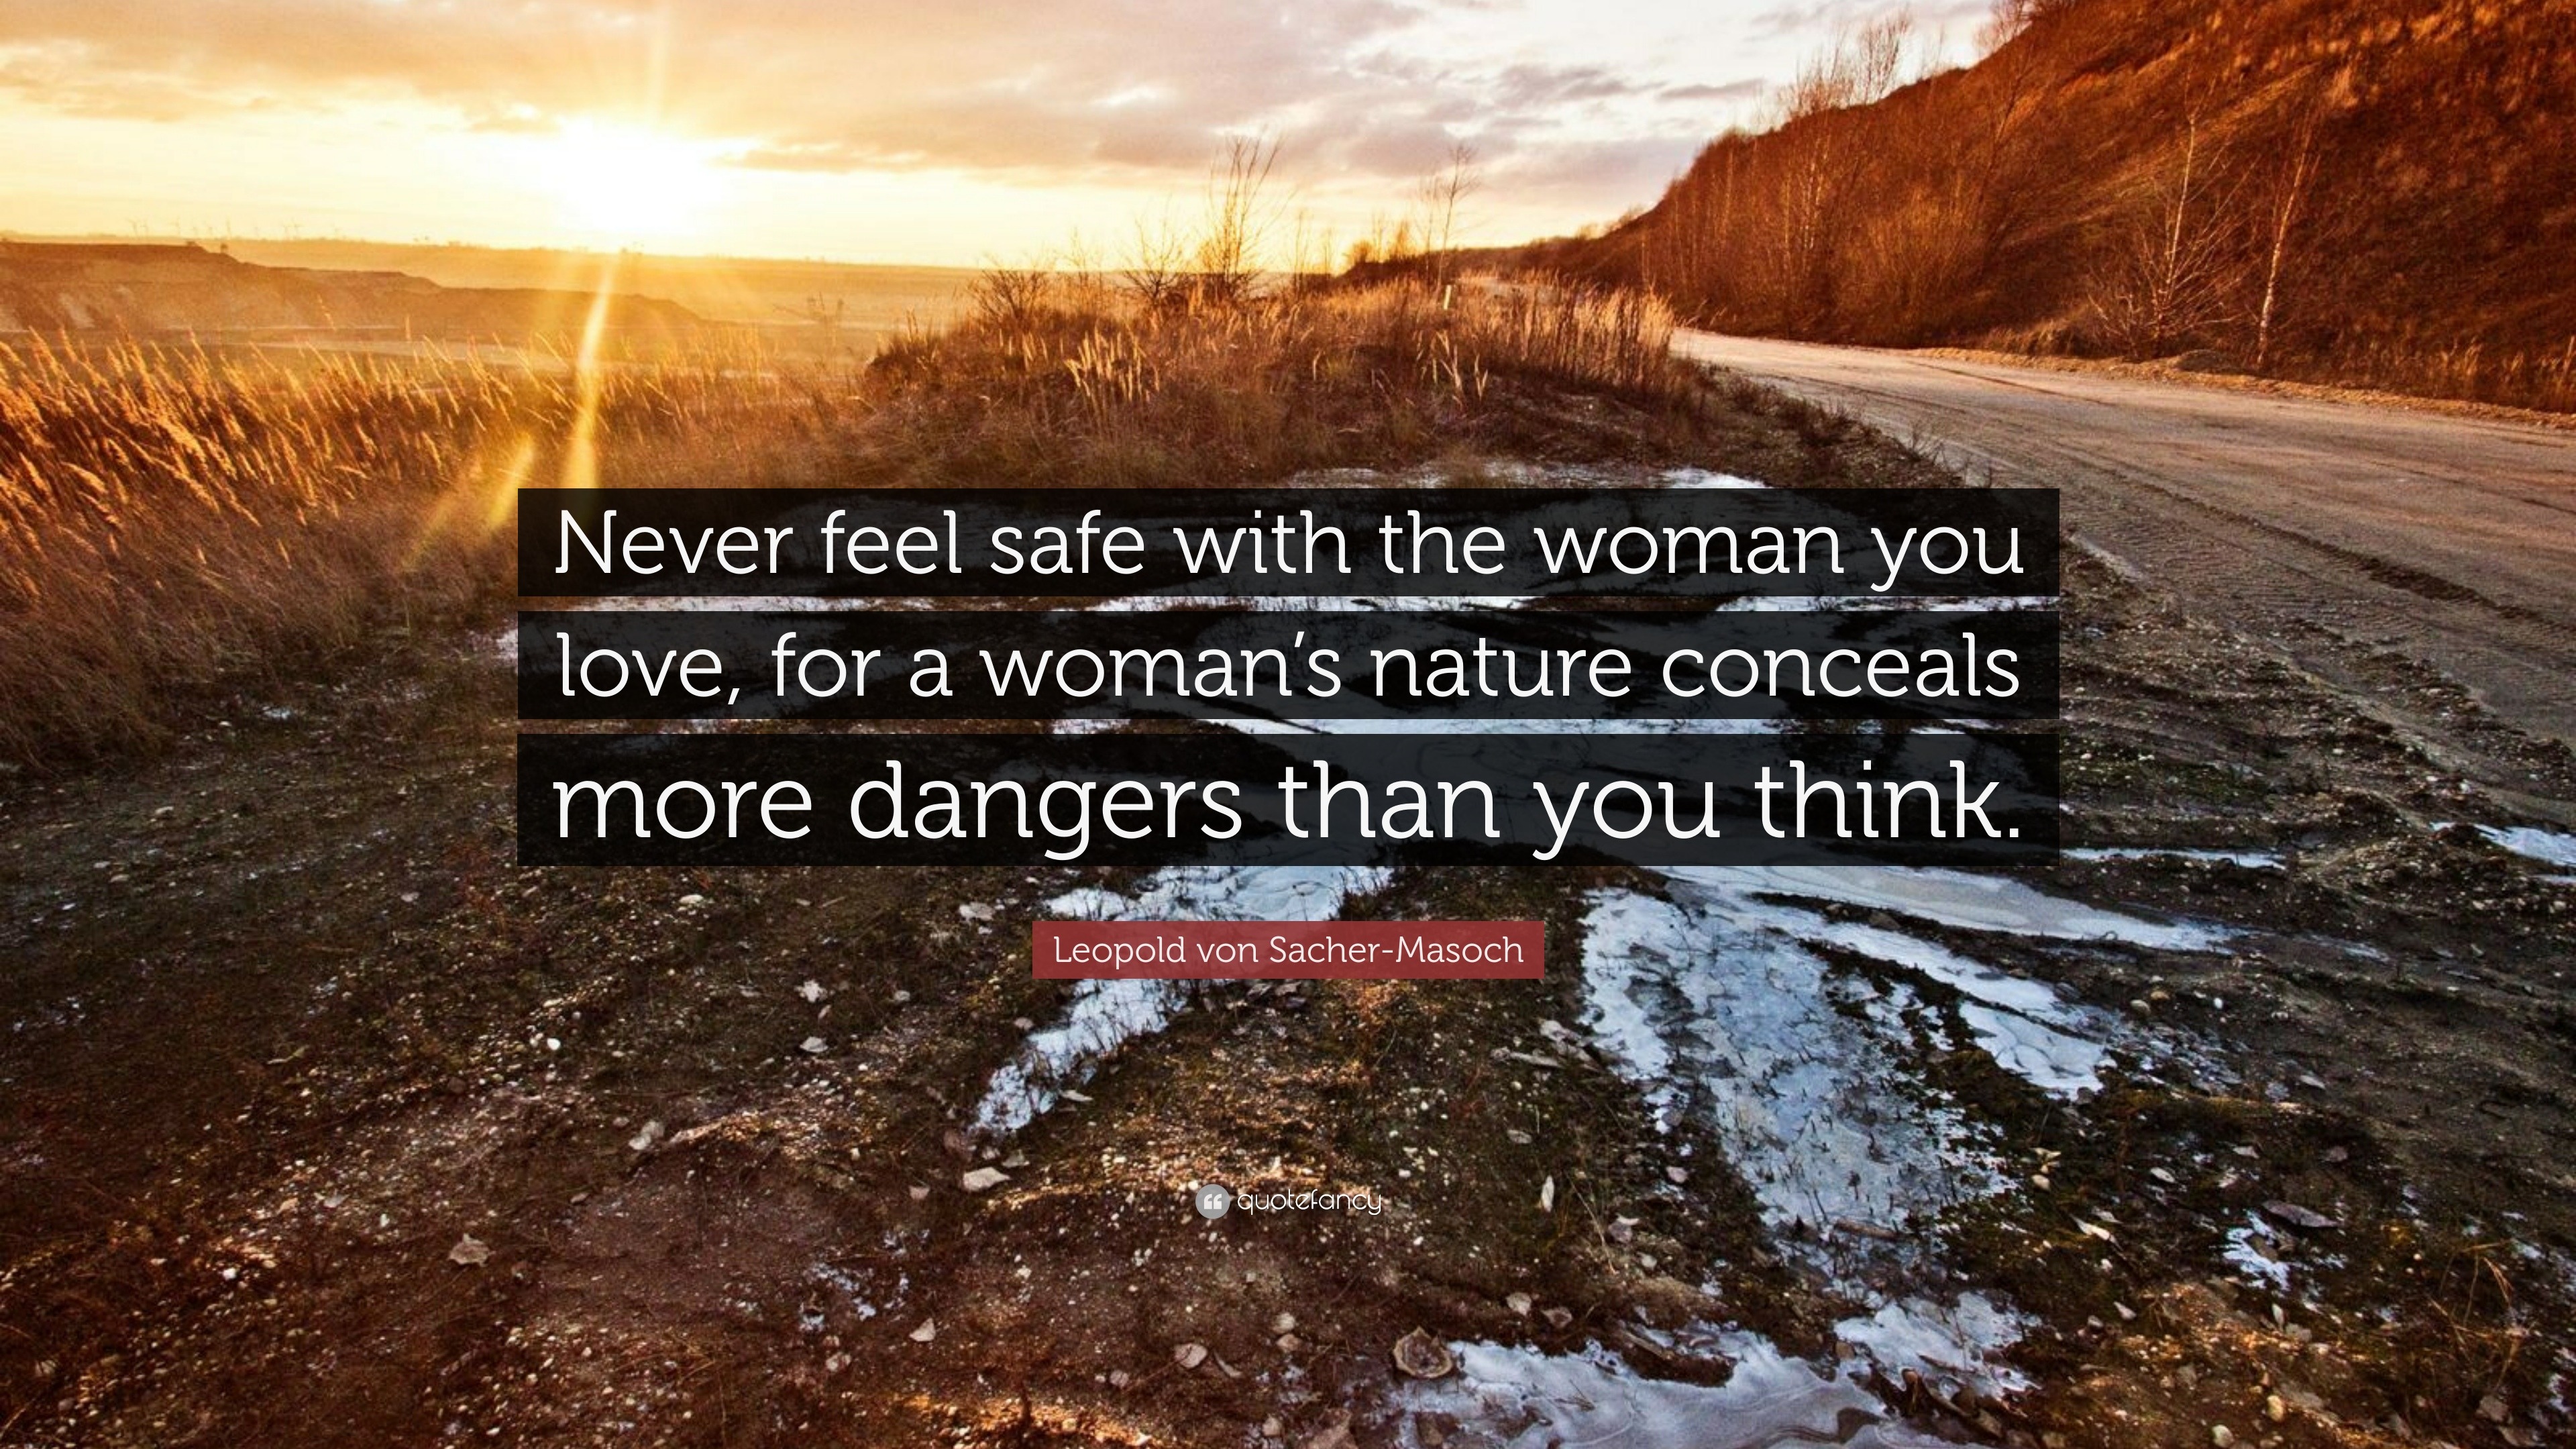 Leopold von Sacher-Masoch Quote: “Never feel safe with the woman you ...